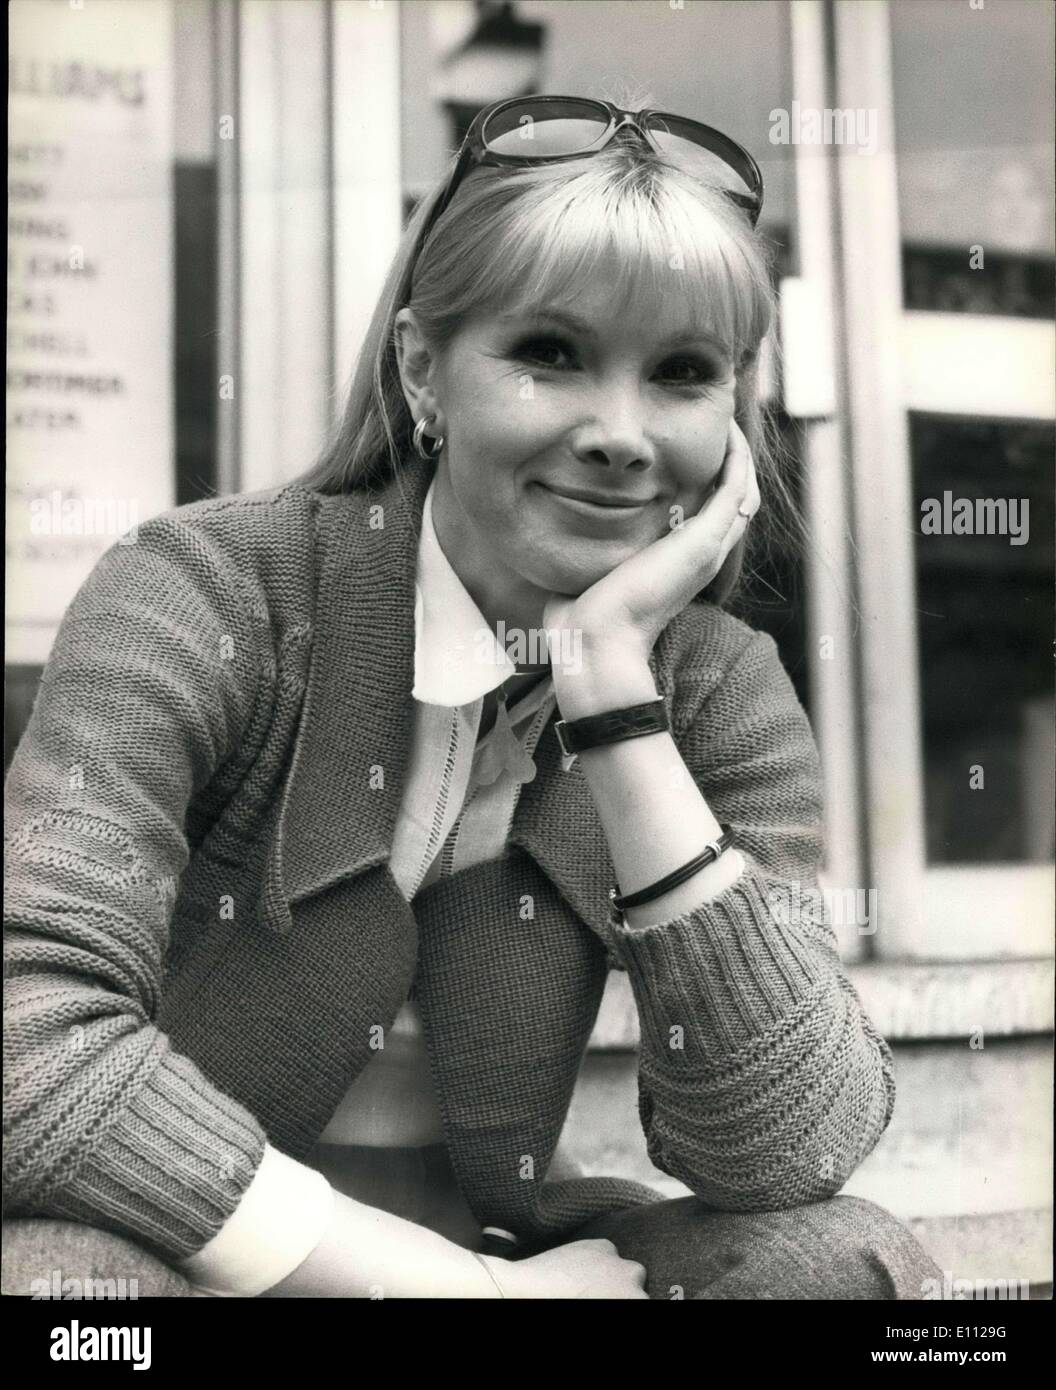 Apr. 23, 1975 - Susan Hampshire To Star In ''As You Like It'': Actress Susan Hampshire is to star as Rosalind in the Dolphin Theatre Company production of ''As You Like It'', directed by John David at the Shaw theatre, Euston Road, on June 4th. Photo shows Susan Hampshire pictured outside the Shaw Theatre today. Stock Photo